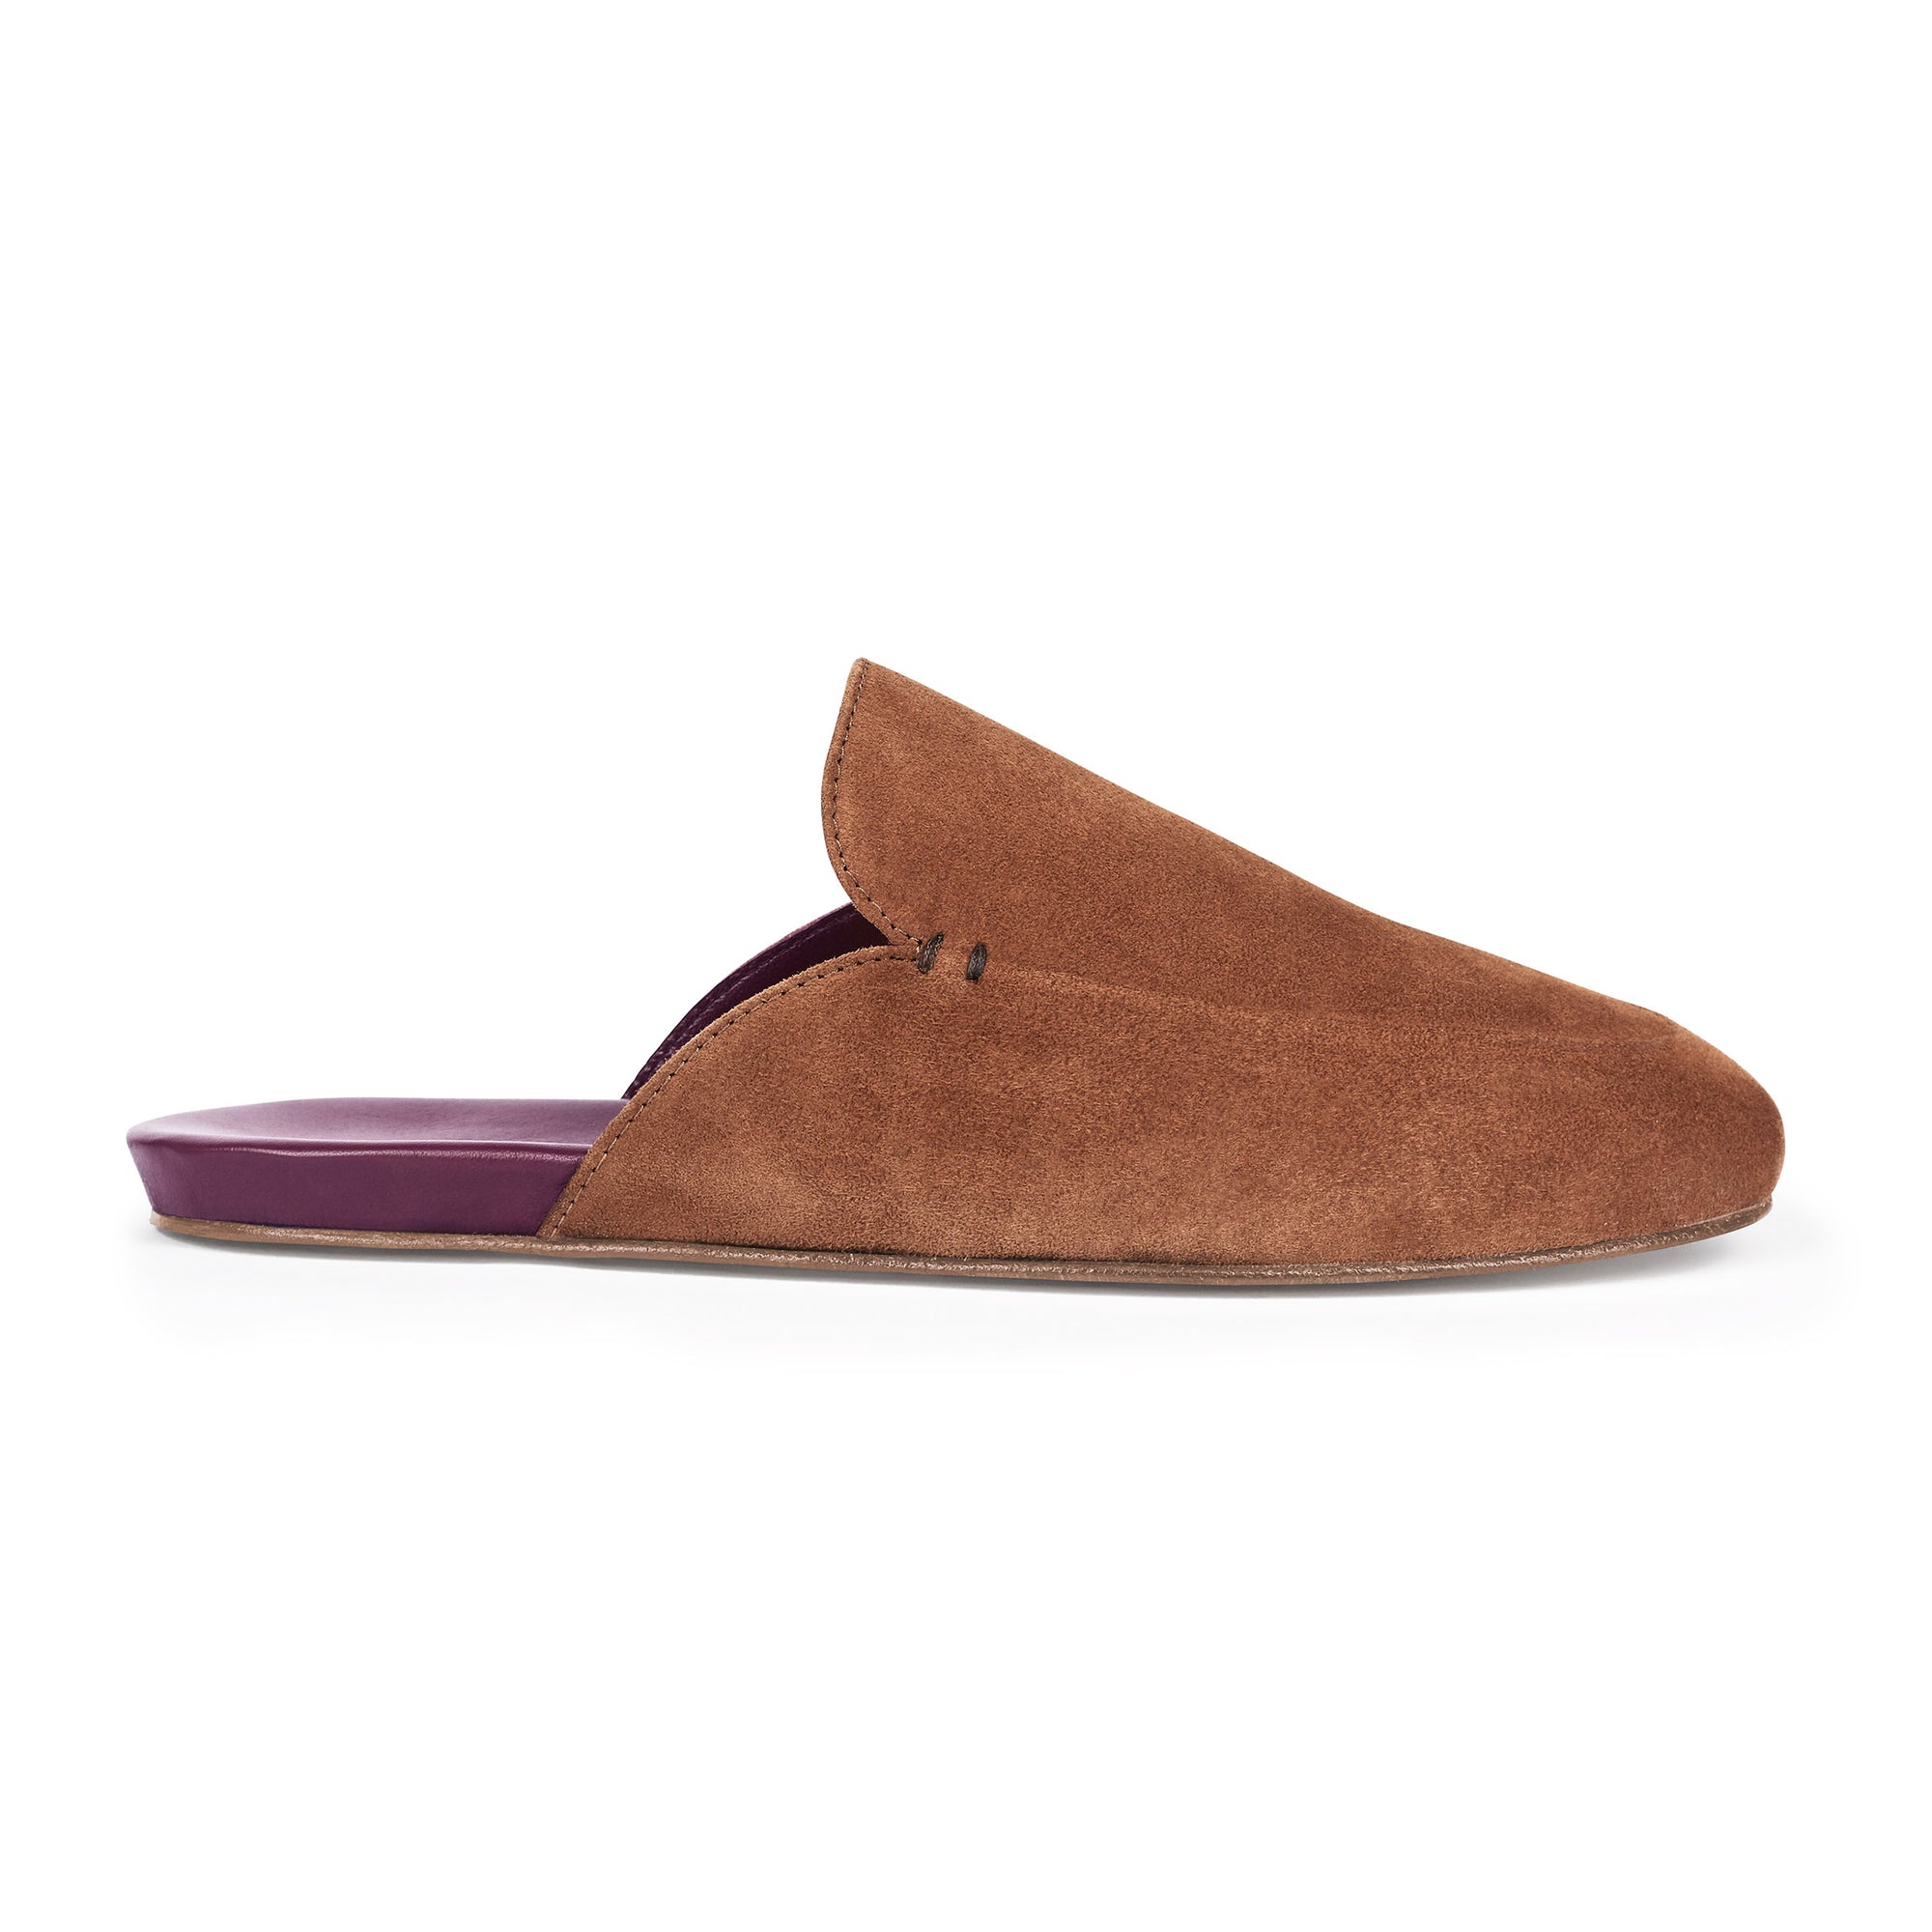 Inabo Women's Slowfer slipper in brown suede and burgundy leather insole shown in profile